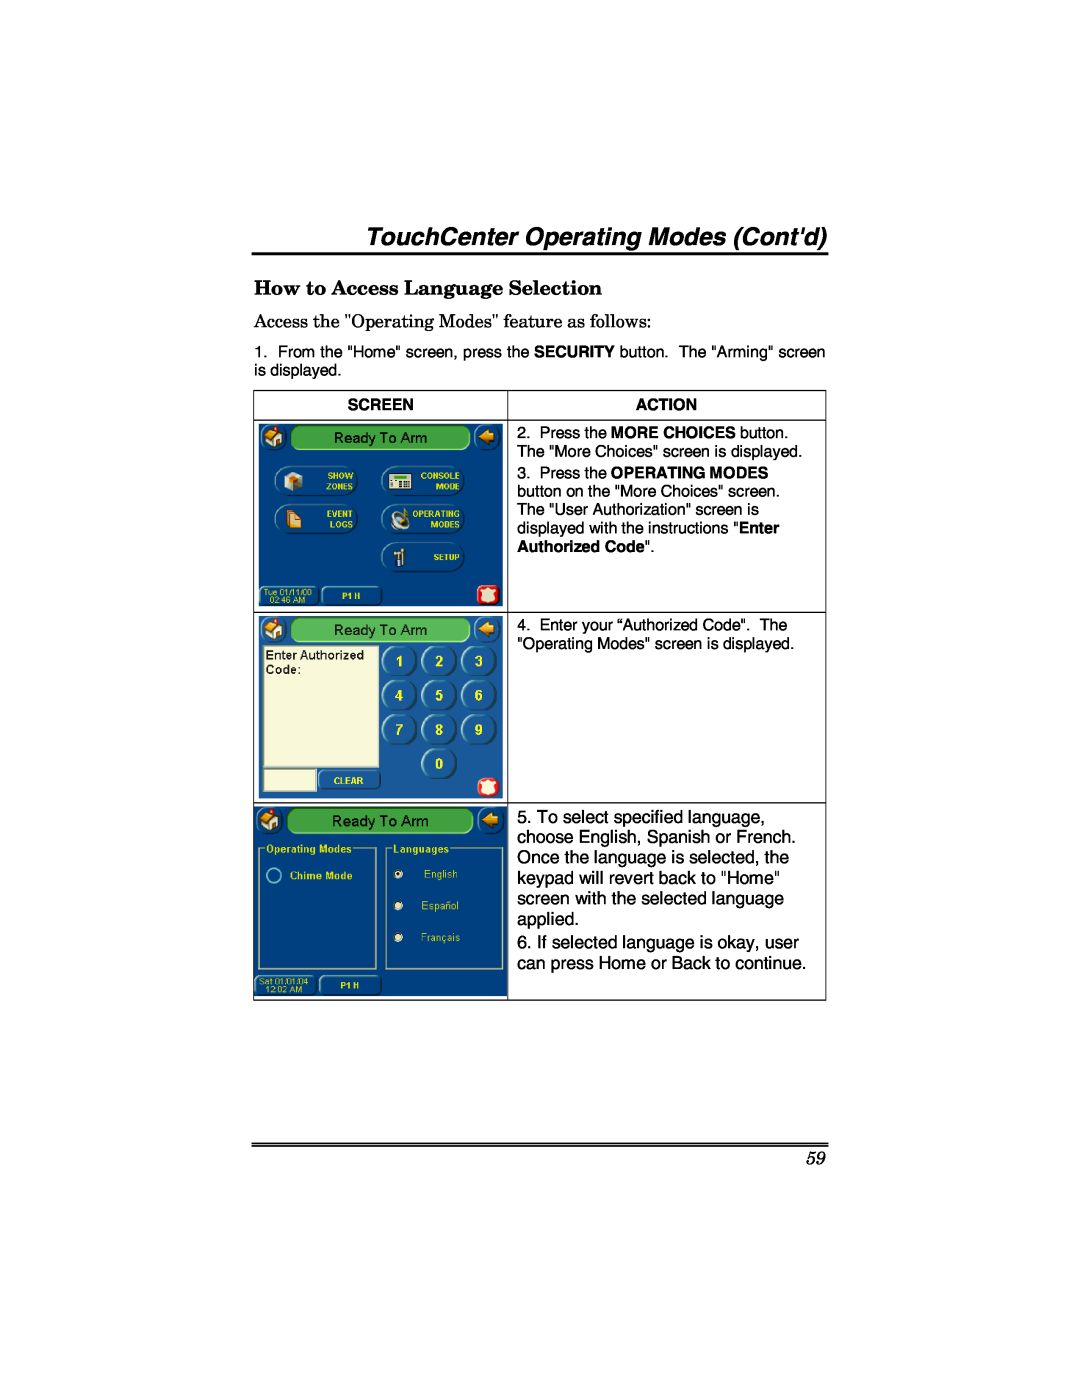 Honeywell 6271 manual TouchCenter Operating Modes Contd, How to Access Language Selection 